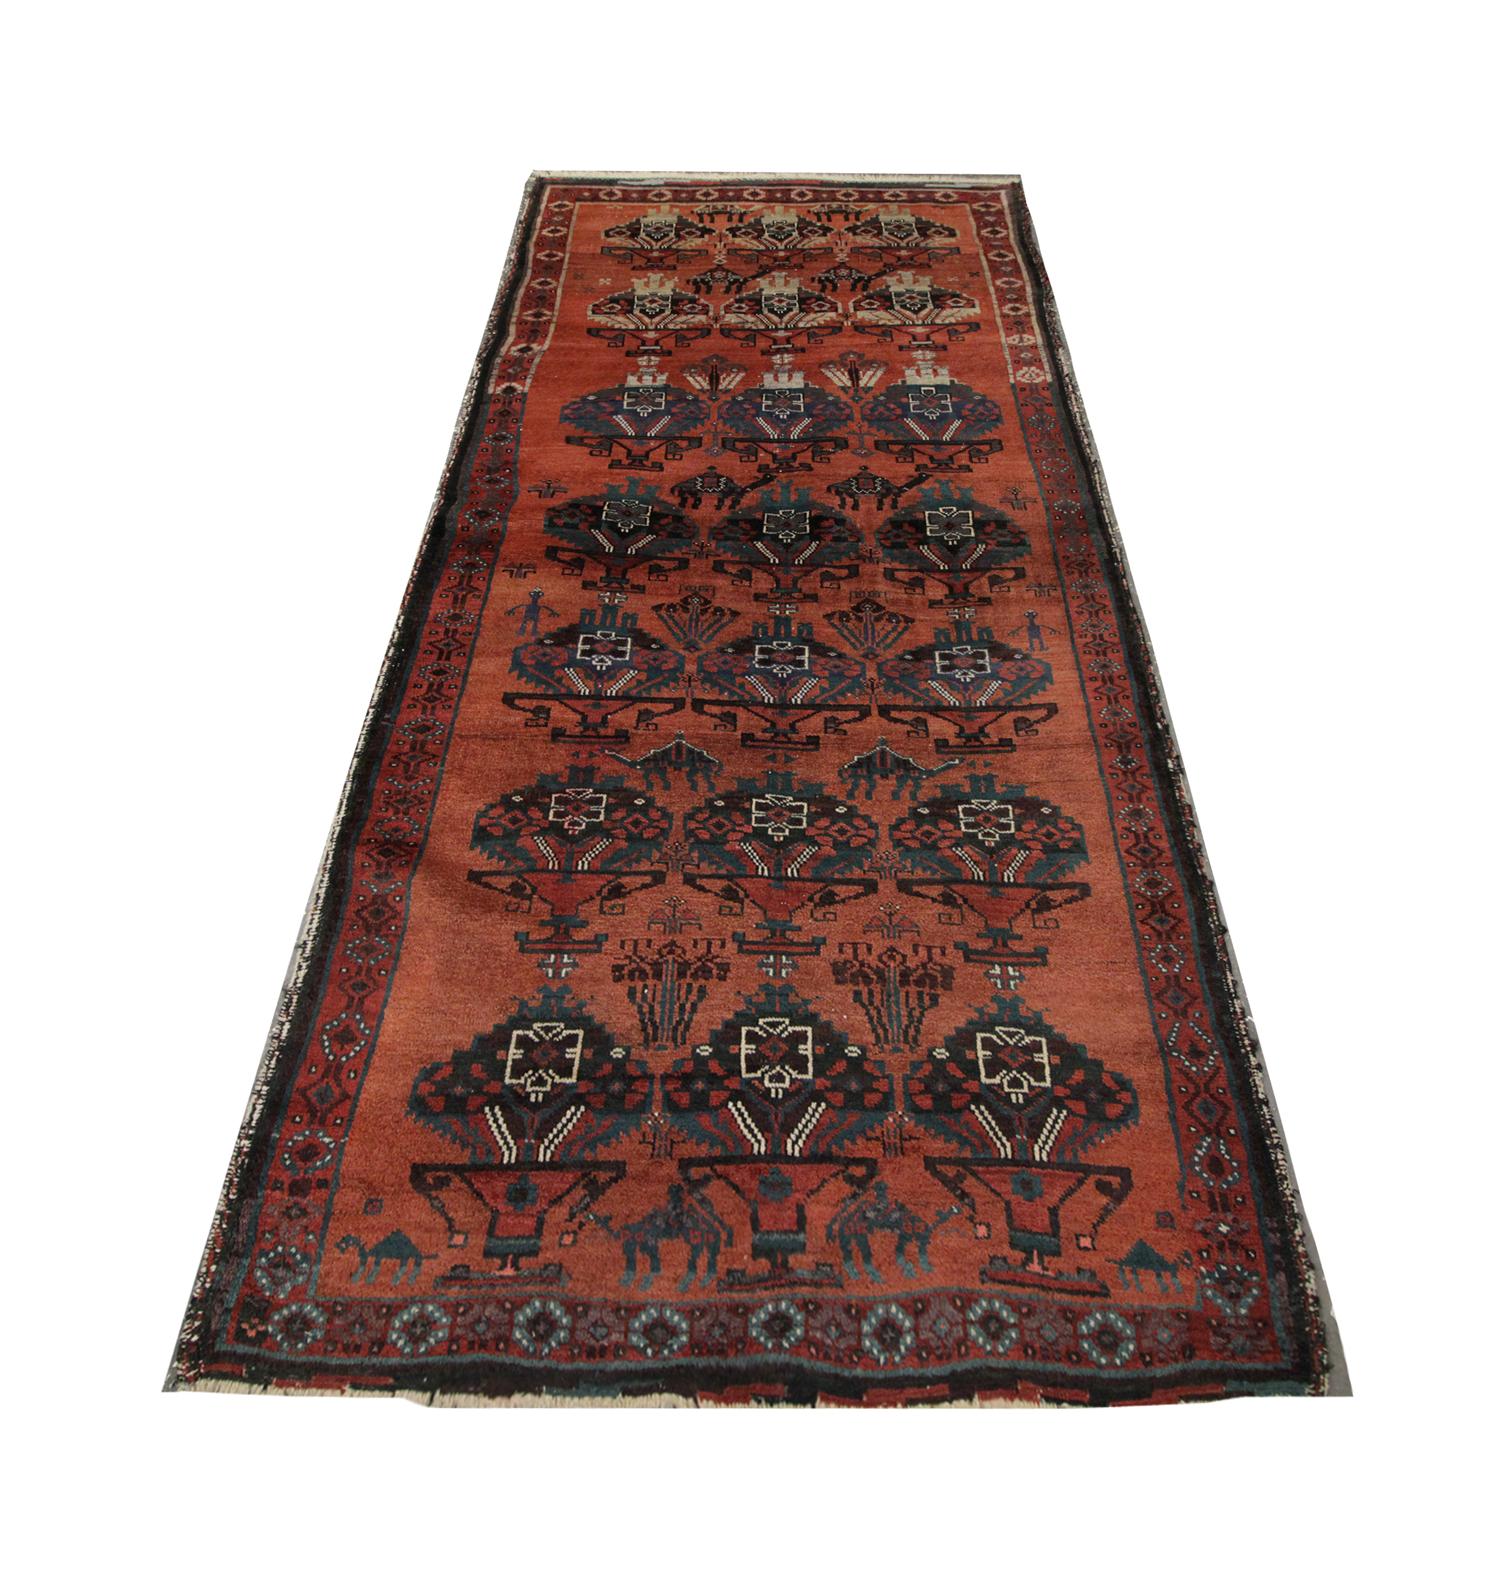 This high-quality antique Azerbaijan living room rug features a repeat pattern of vase-like motifs and camel emblems intricately handwoven in 1930 with handspun cotton and wool, dyed using organic vegetable dyes. This is enclosed with a repeat